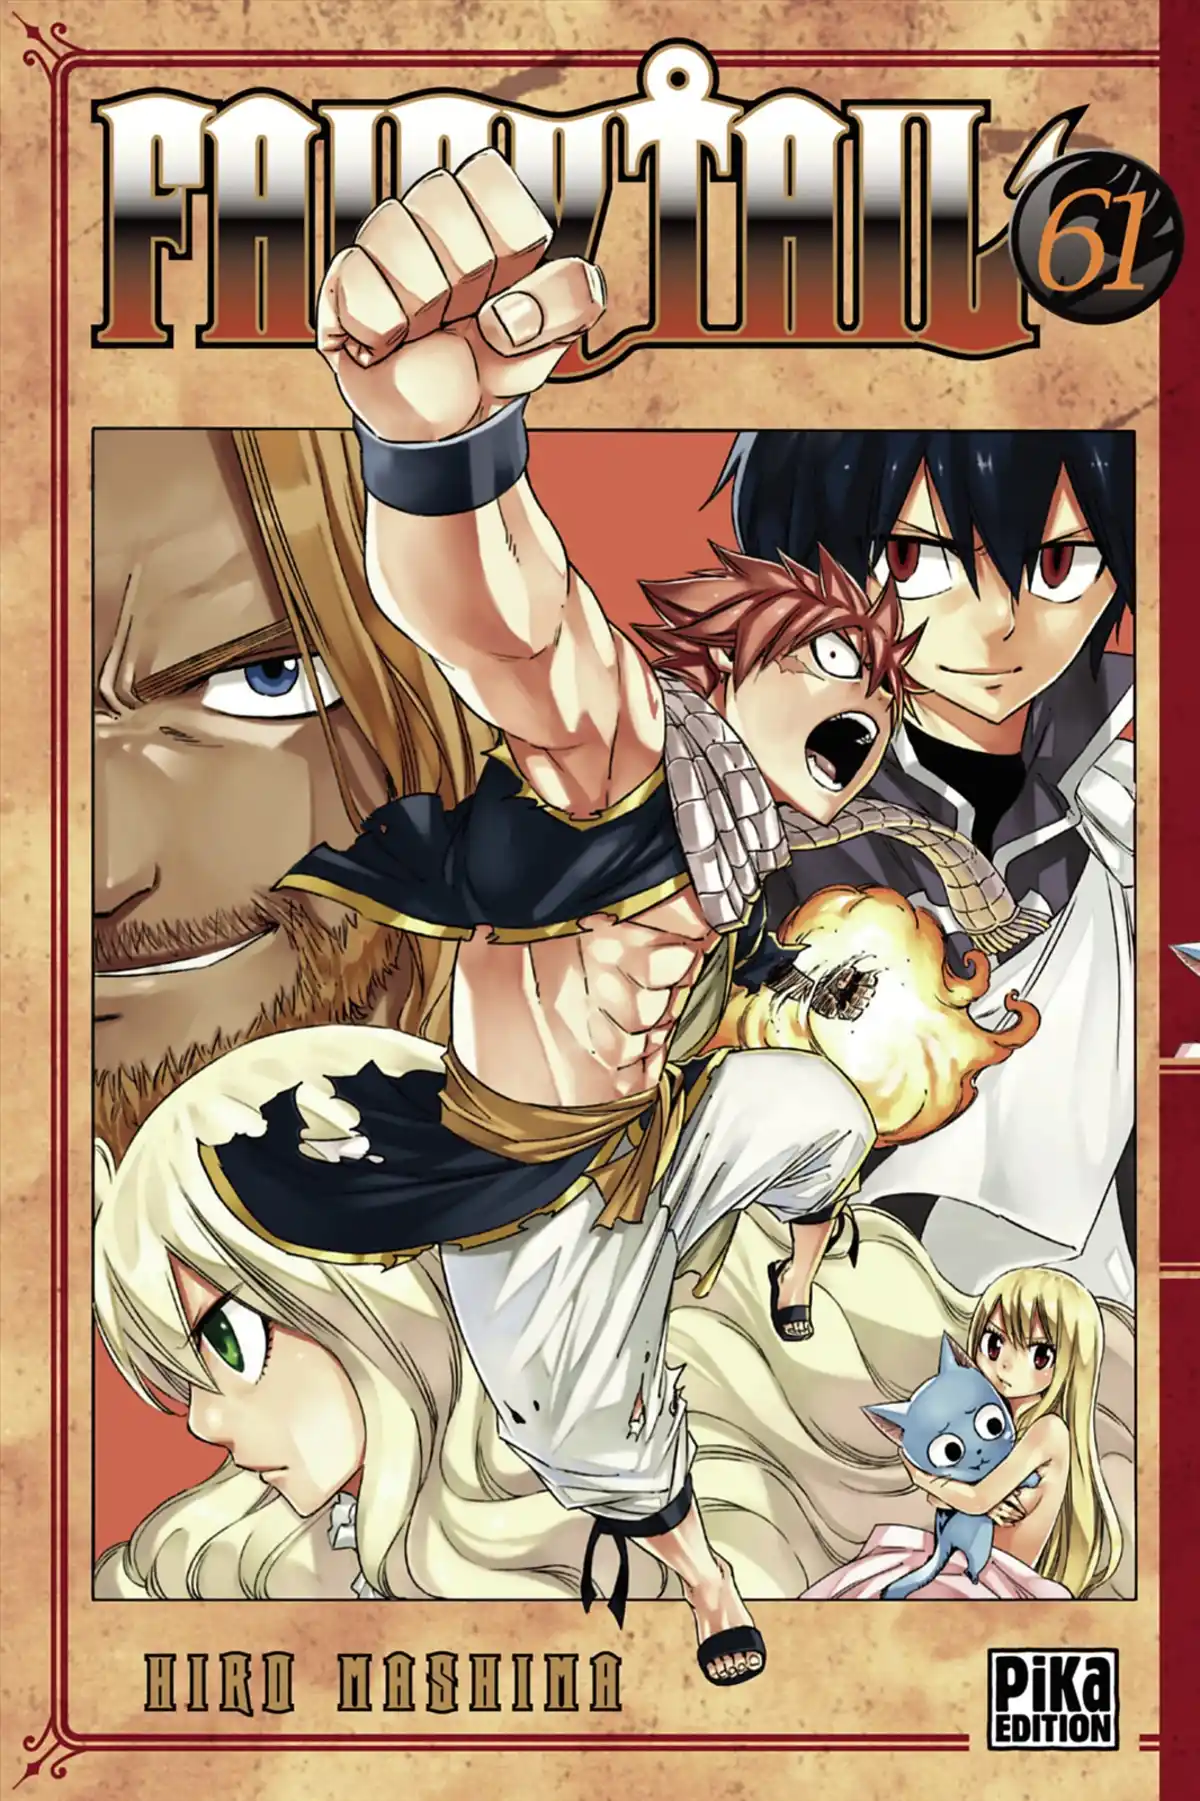 Fairy Tail Volume 61 page 1